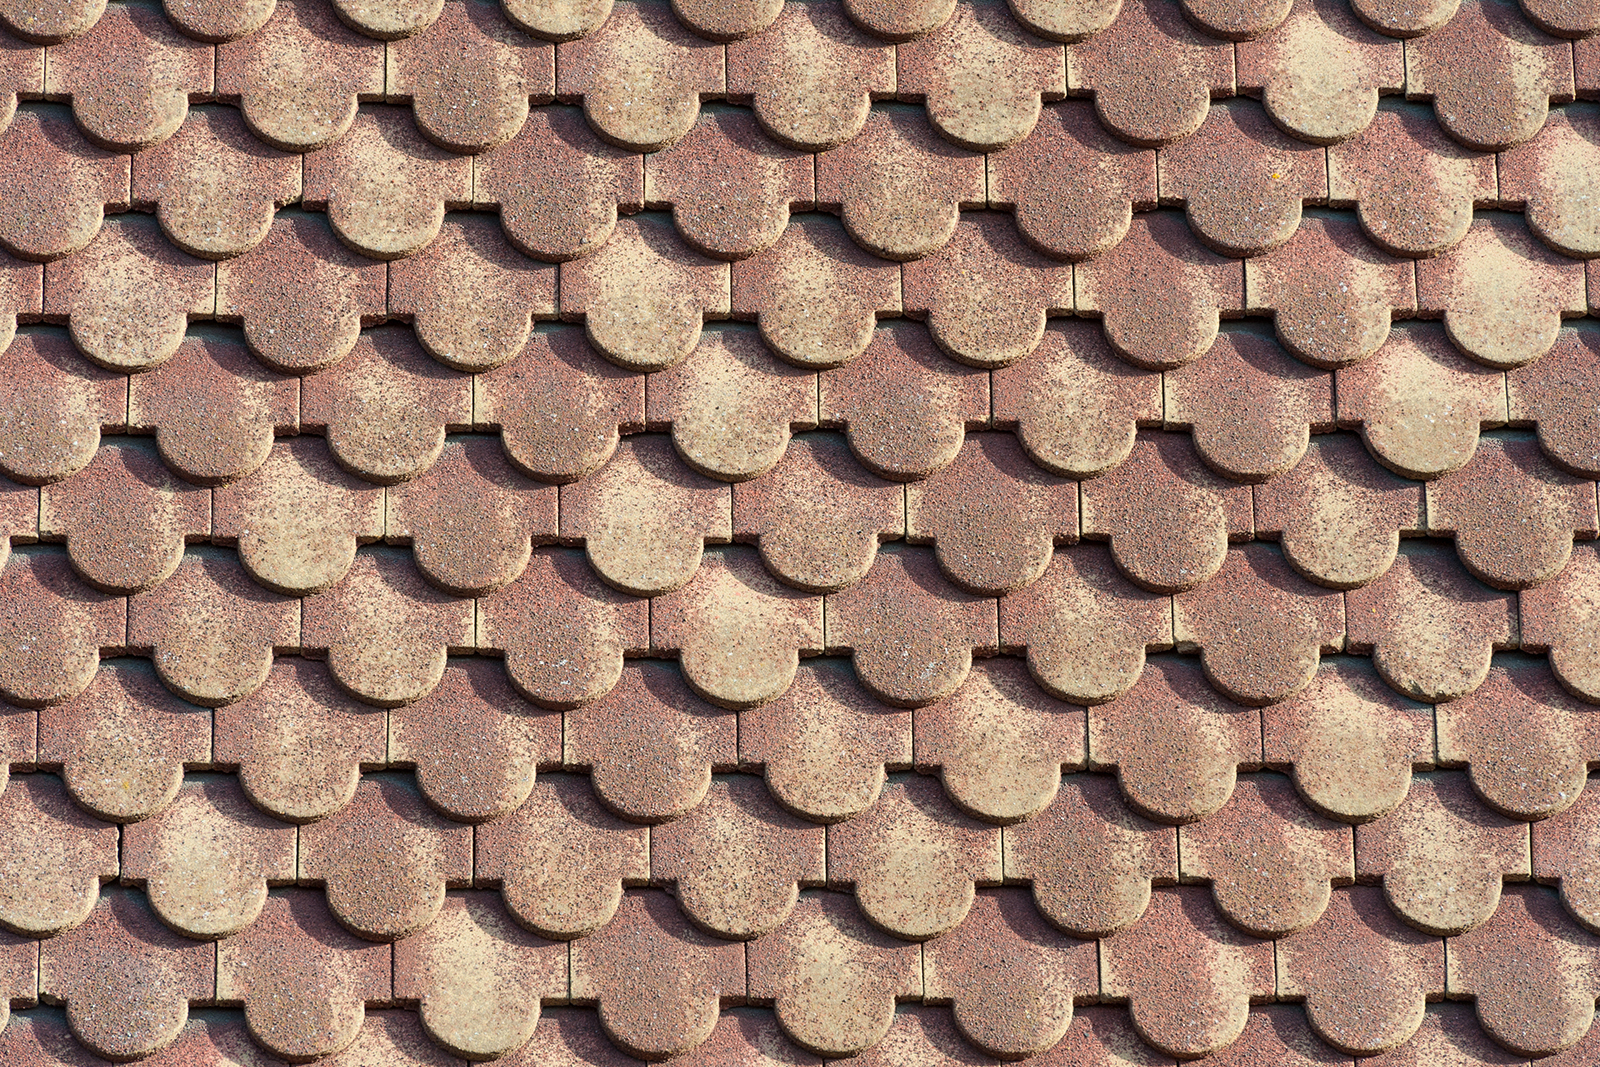 Clay and Concrete Tiles